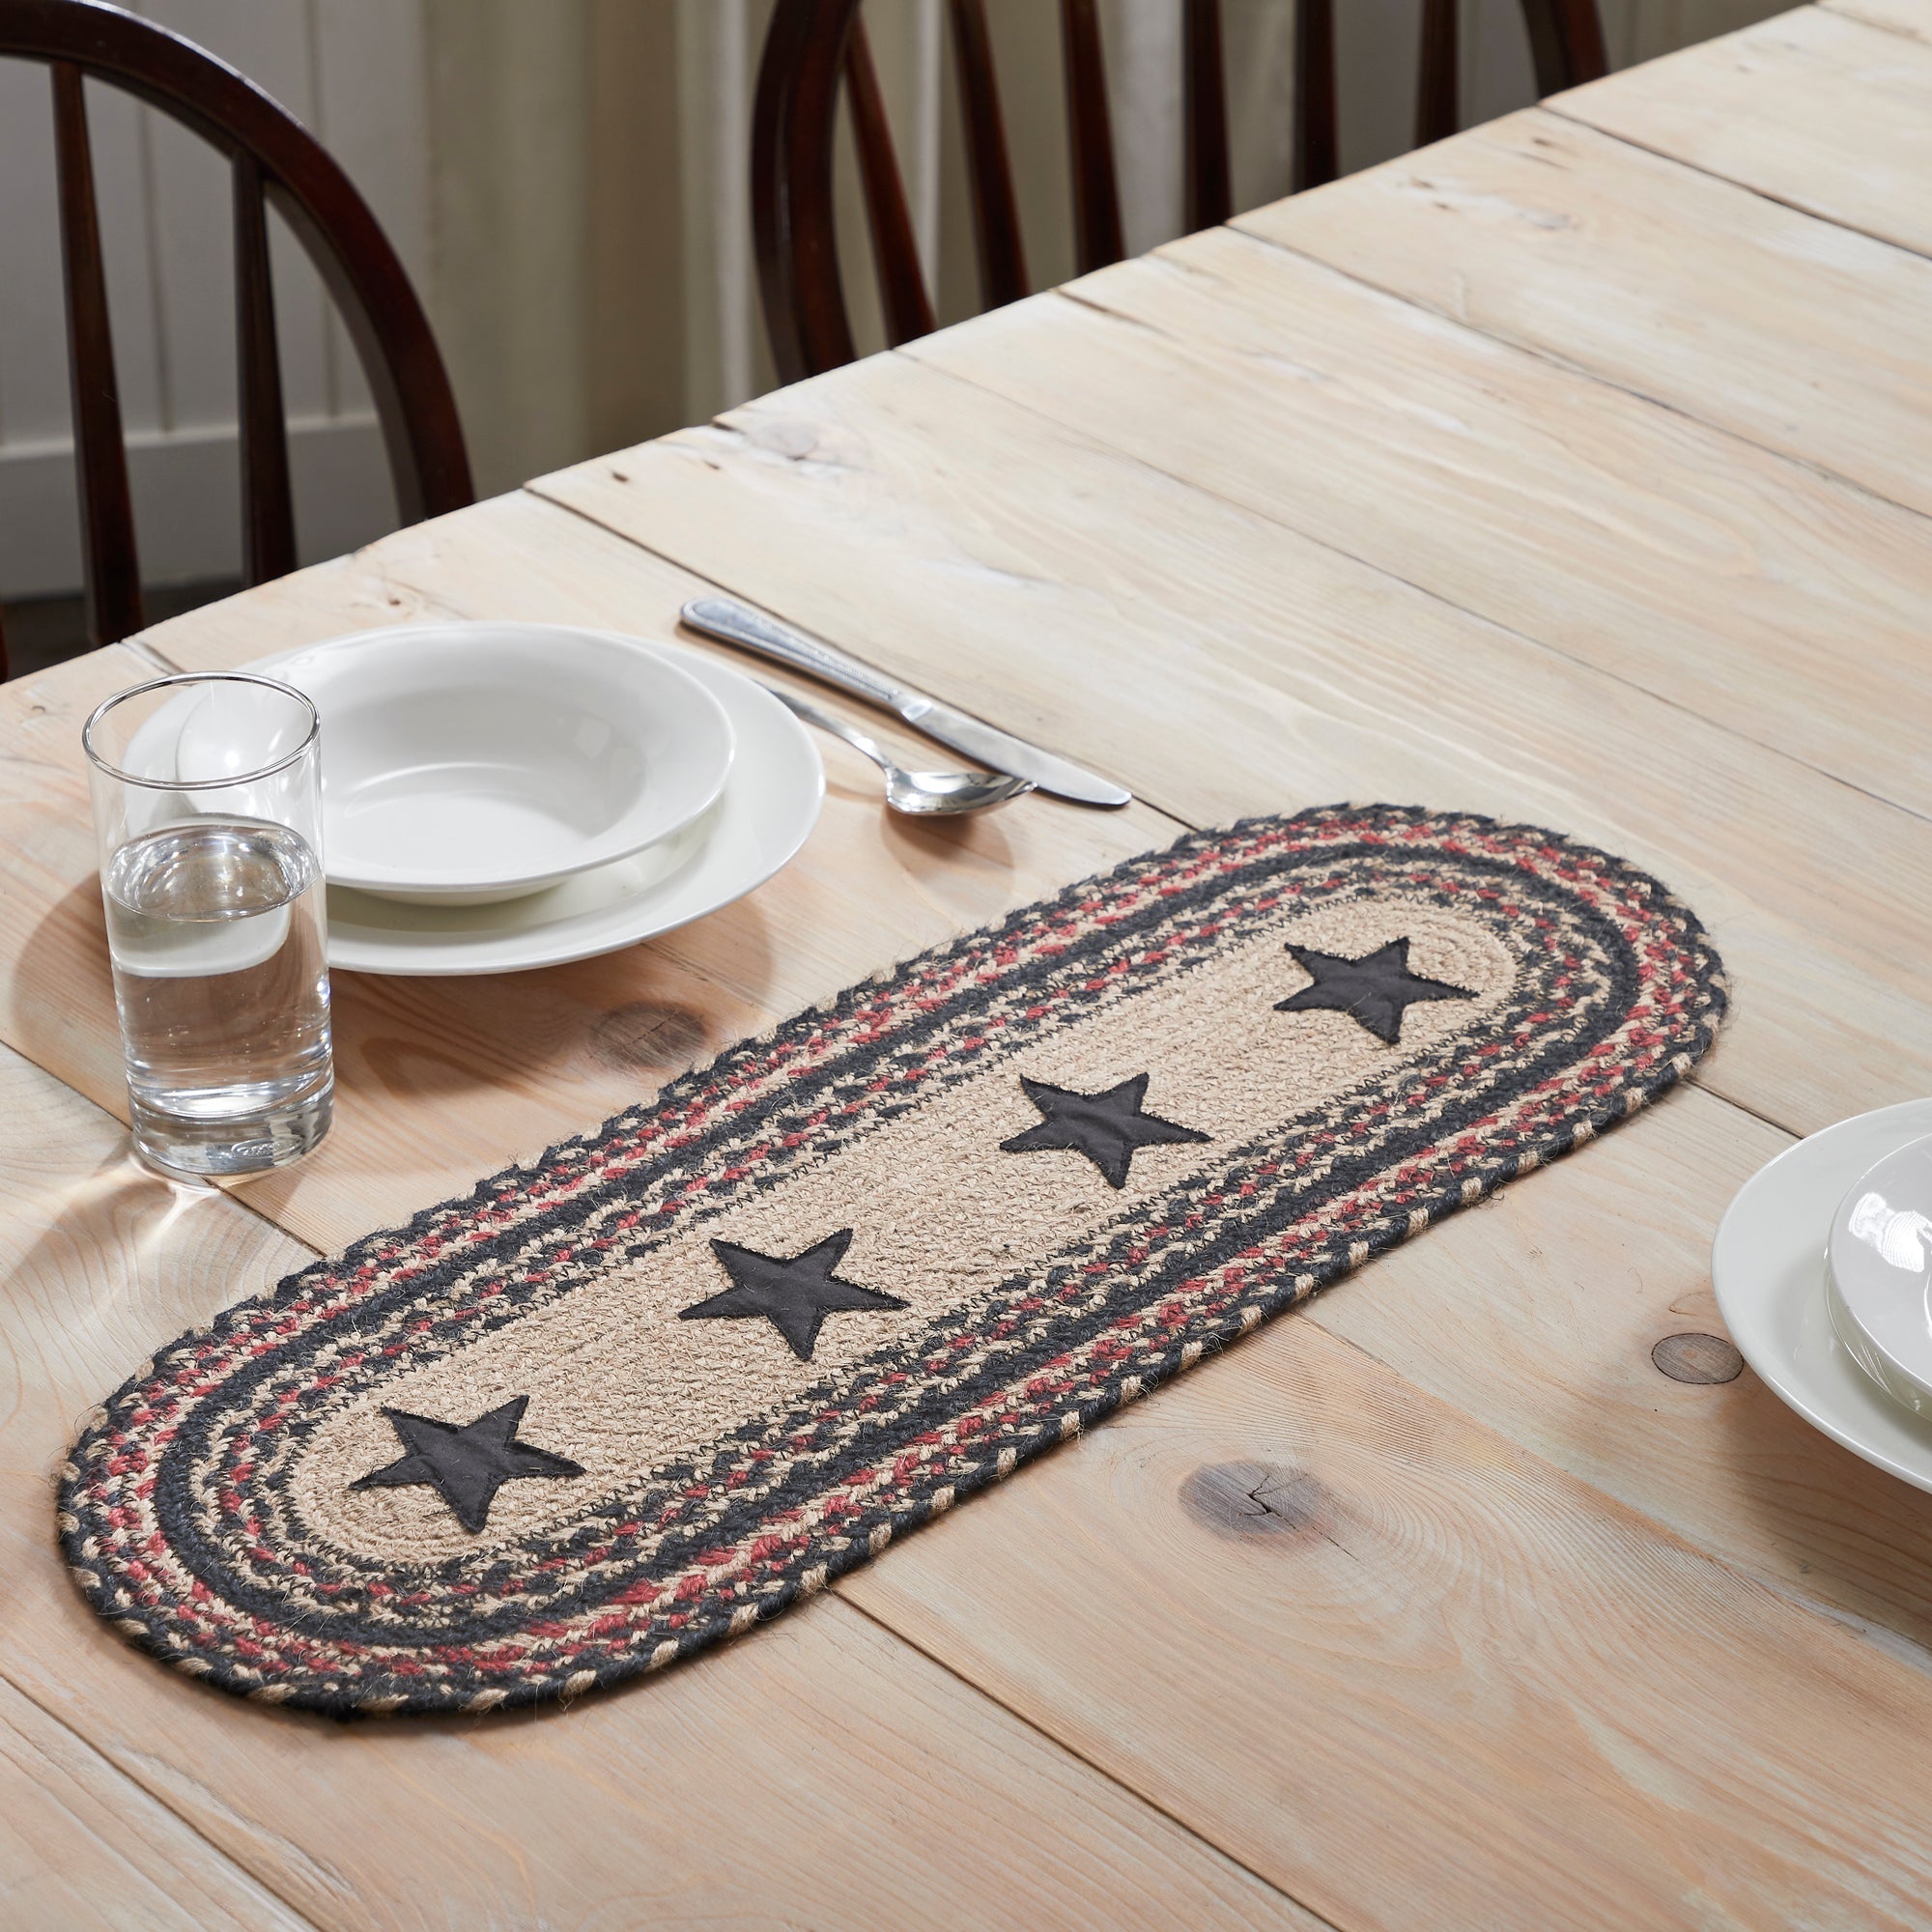 Colonial Star Jute Braided Oval Table Runner 8x24 VHC Brands